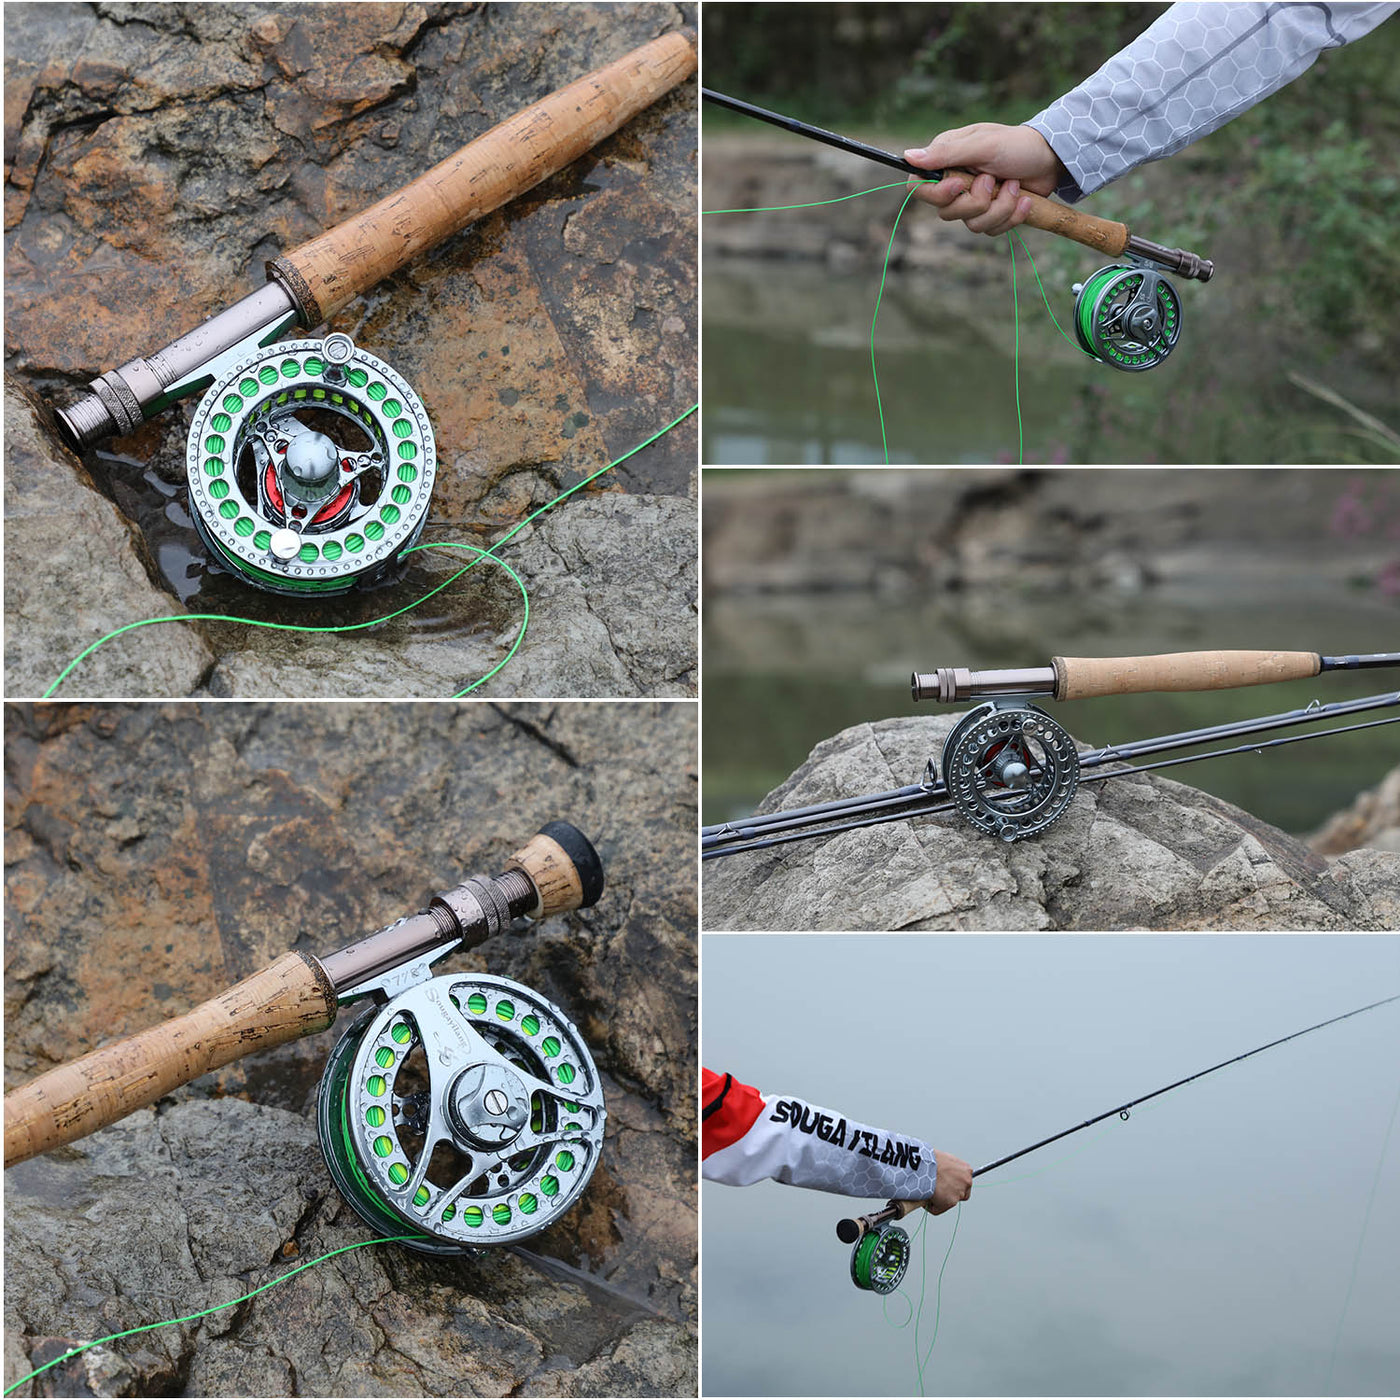 Fly Fishing Reel 2+1 BB Speed Ratio #5/6 #7/8 Fishing Reel with CNC-Machined Aluminum Alloy Body Fly Reels